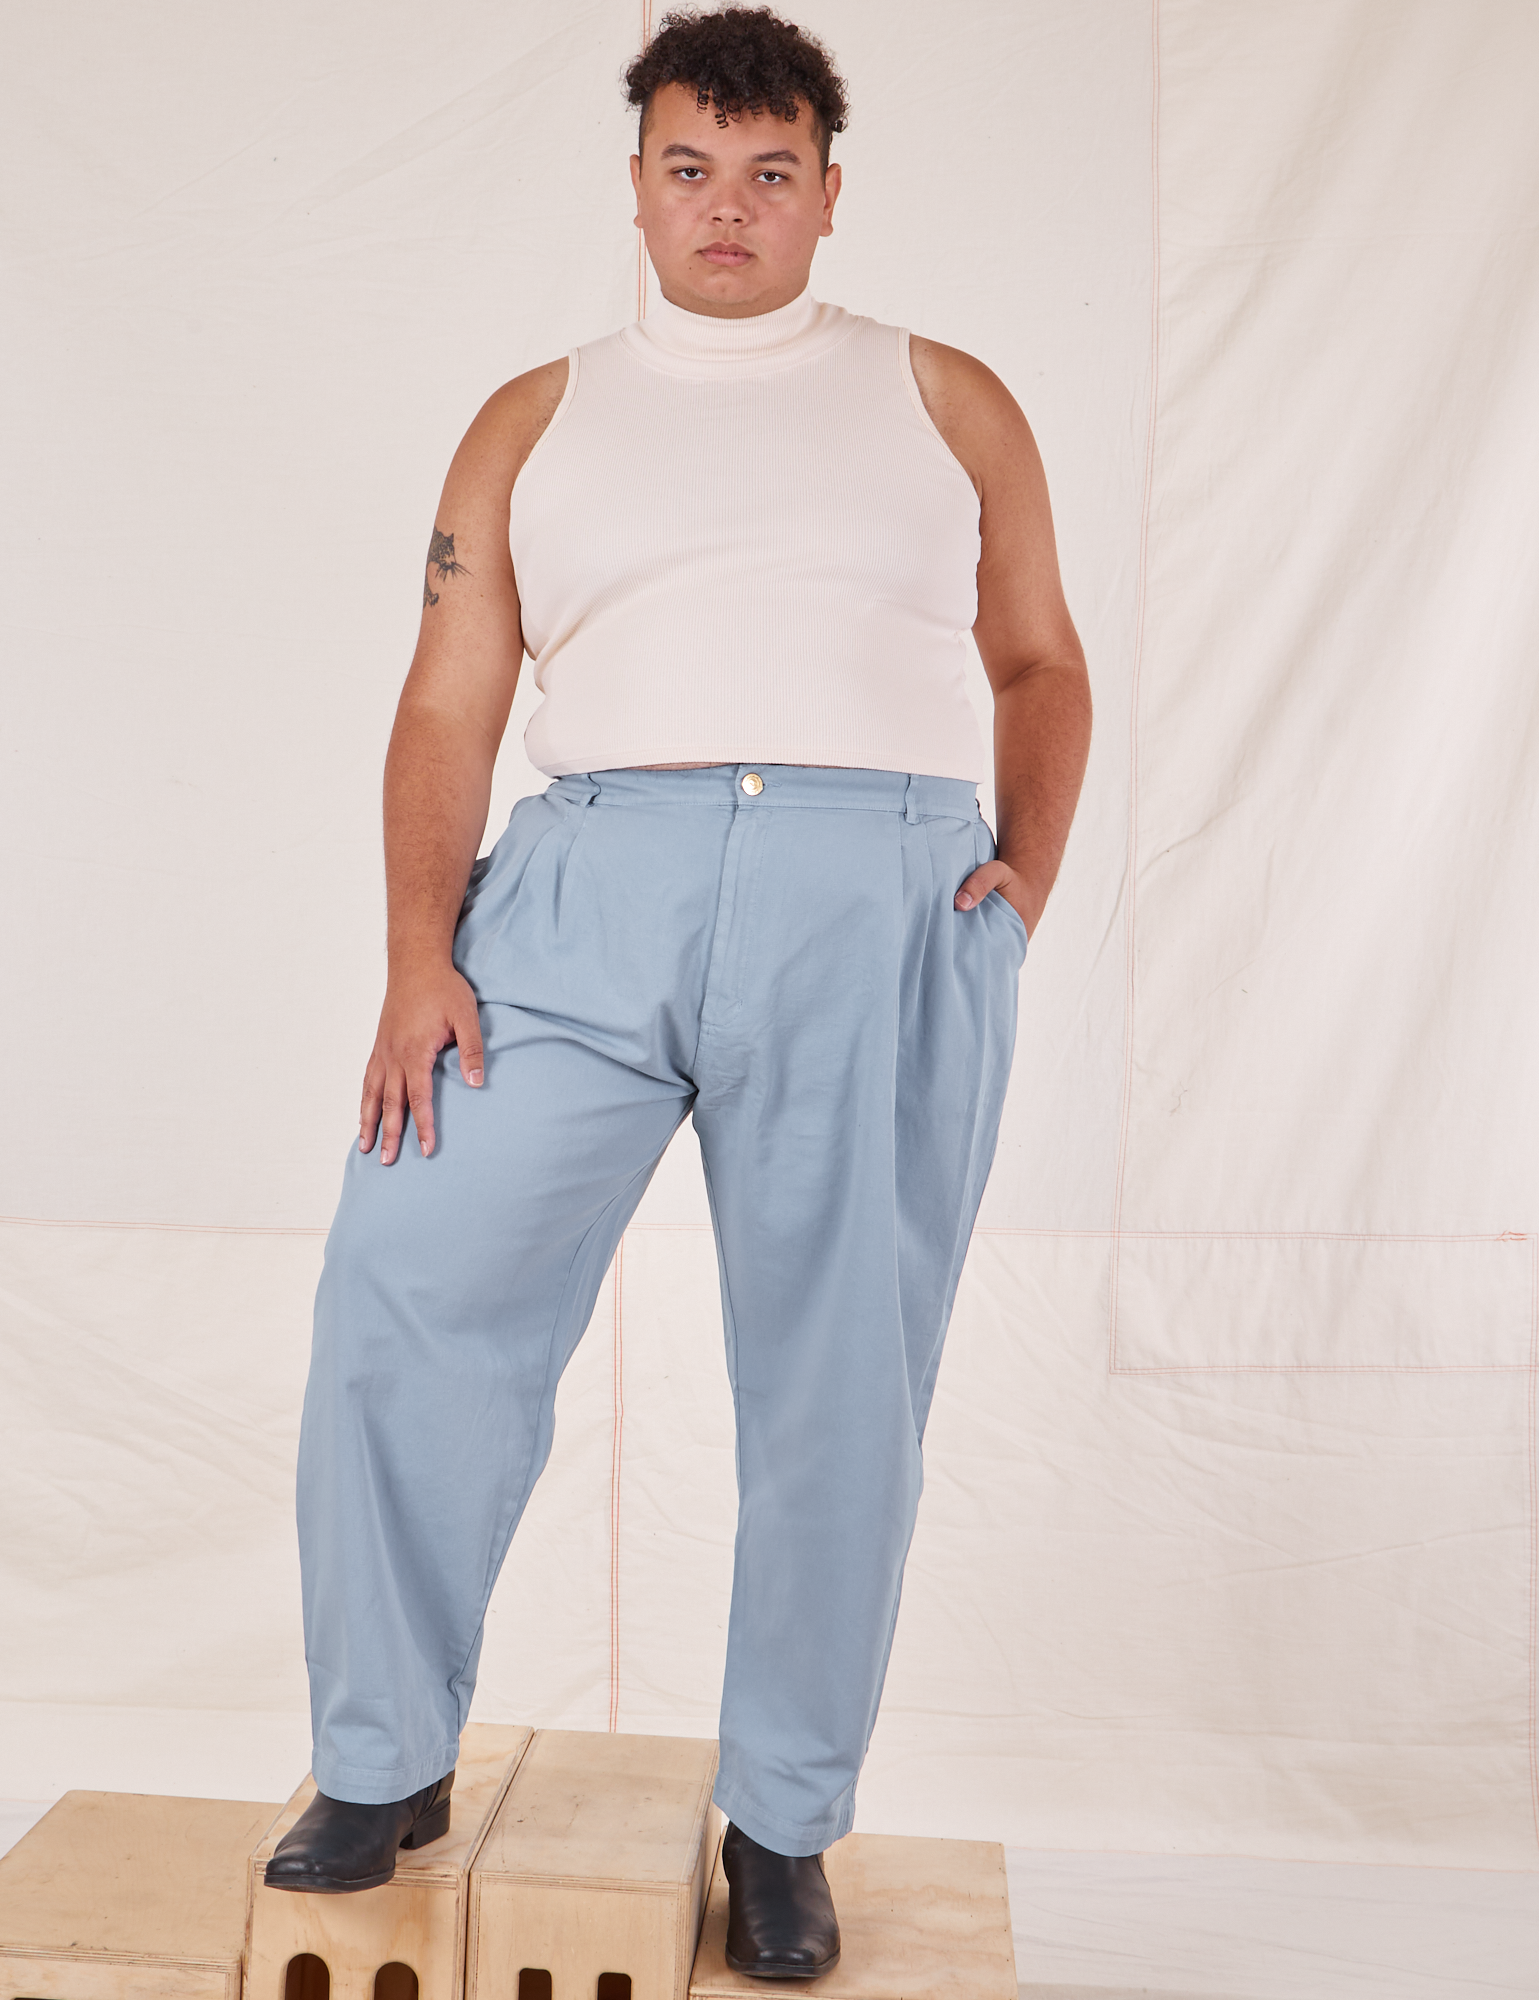 Miguel is 6&#39;0&quot; and wearing 1XL Heavyweight Trousers in Periwinkle paired with vintage off-white Sleeveless Turtleneck